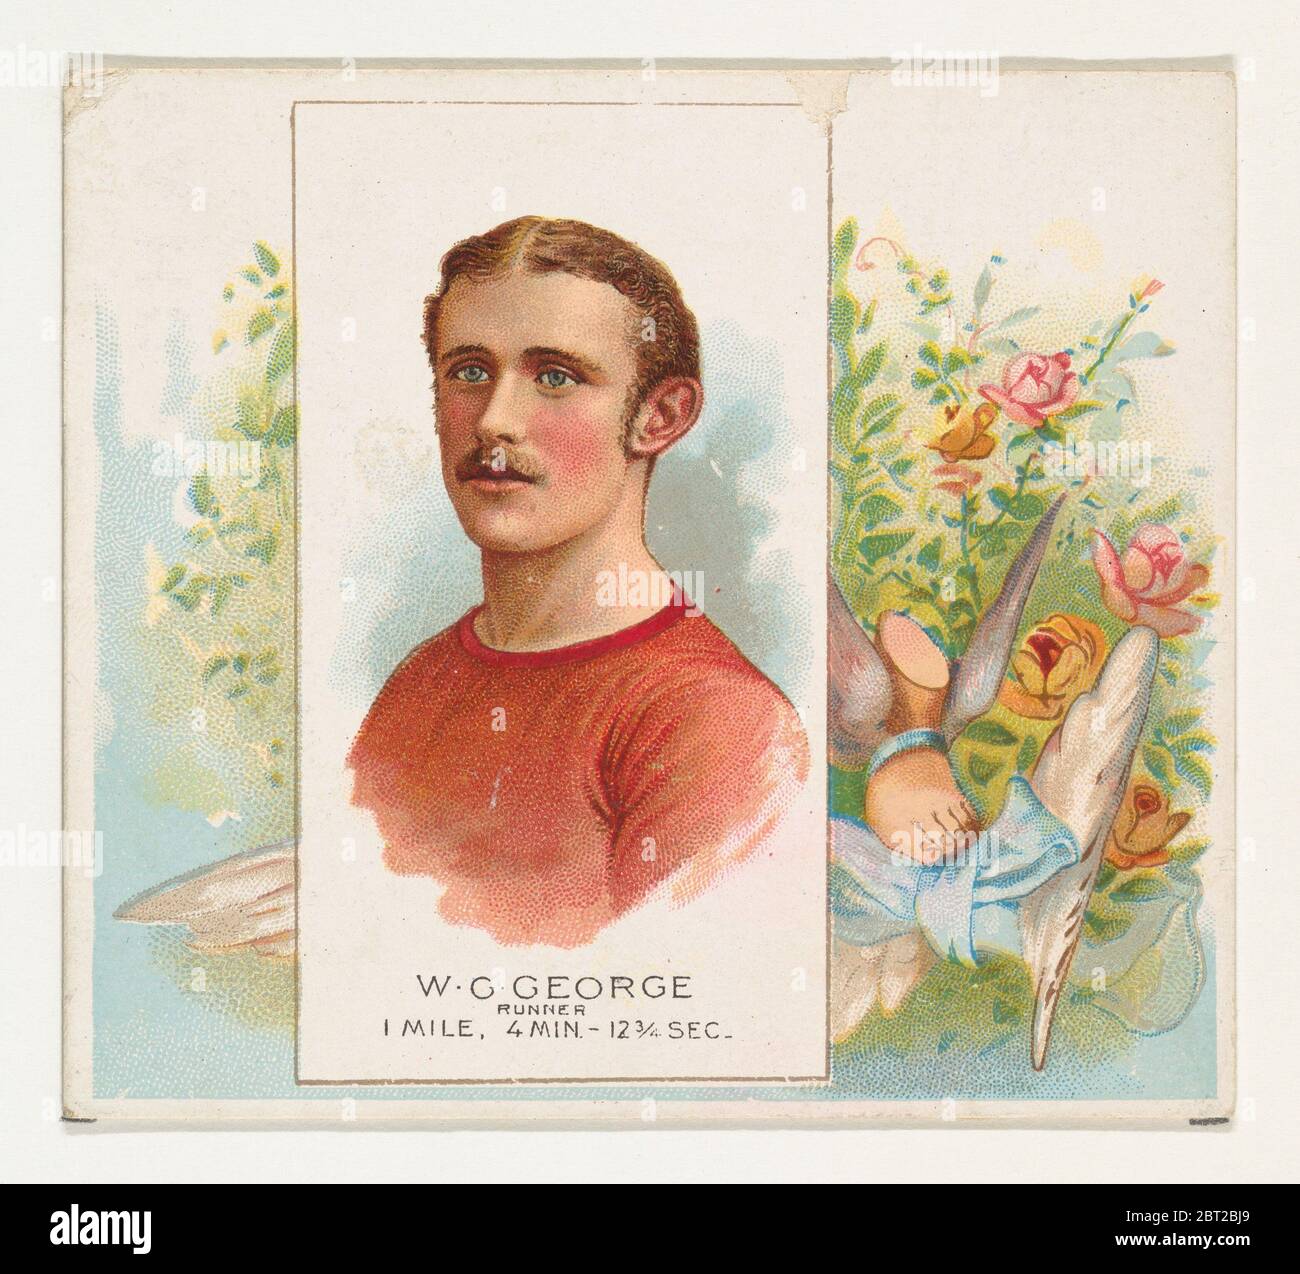 W.G. George, Runner, from World's Champions, Second Series (N43) for Allen &amp; Ginter Cigarettes, 1888. Stock Photo